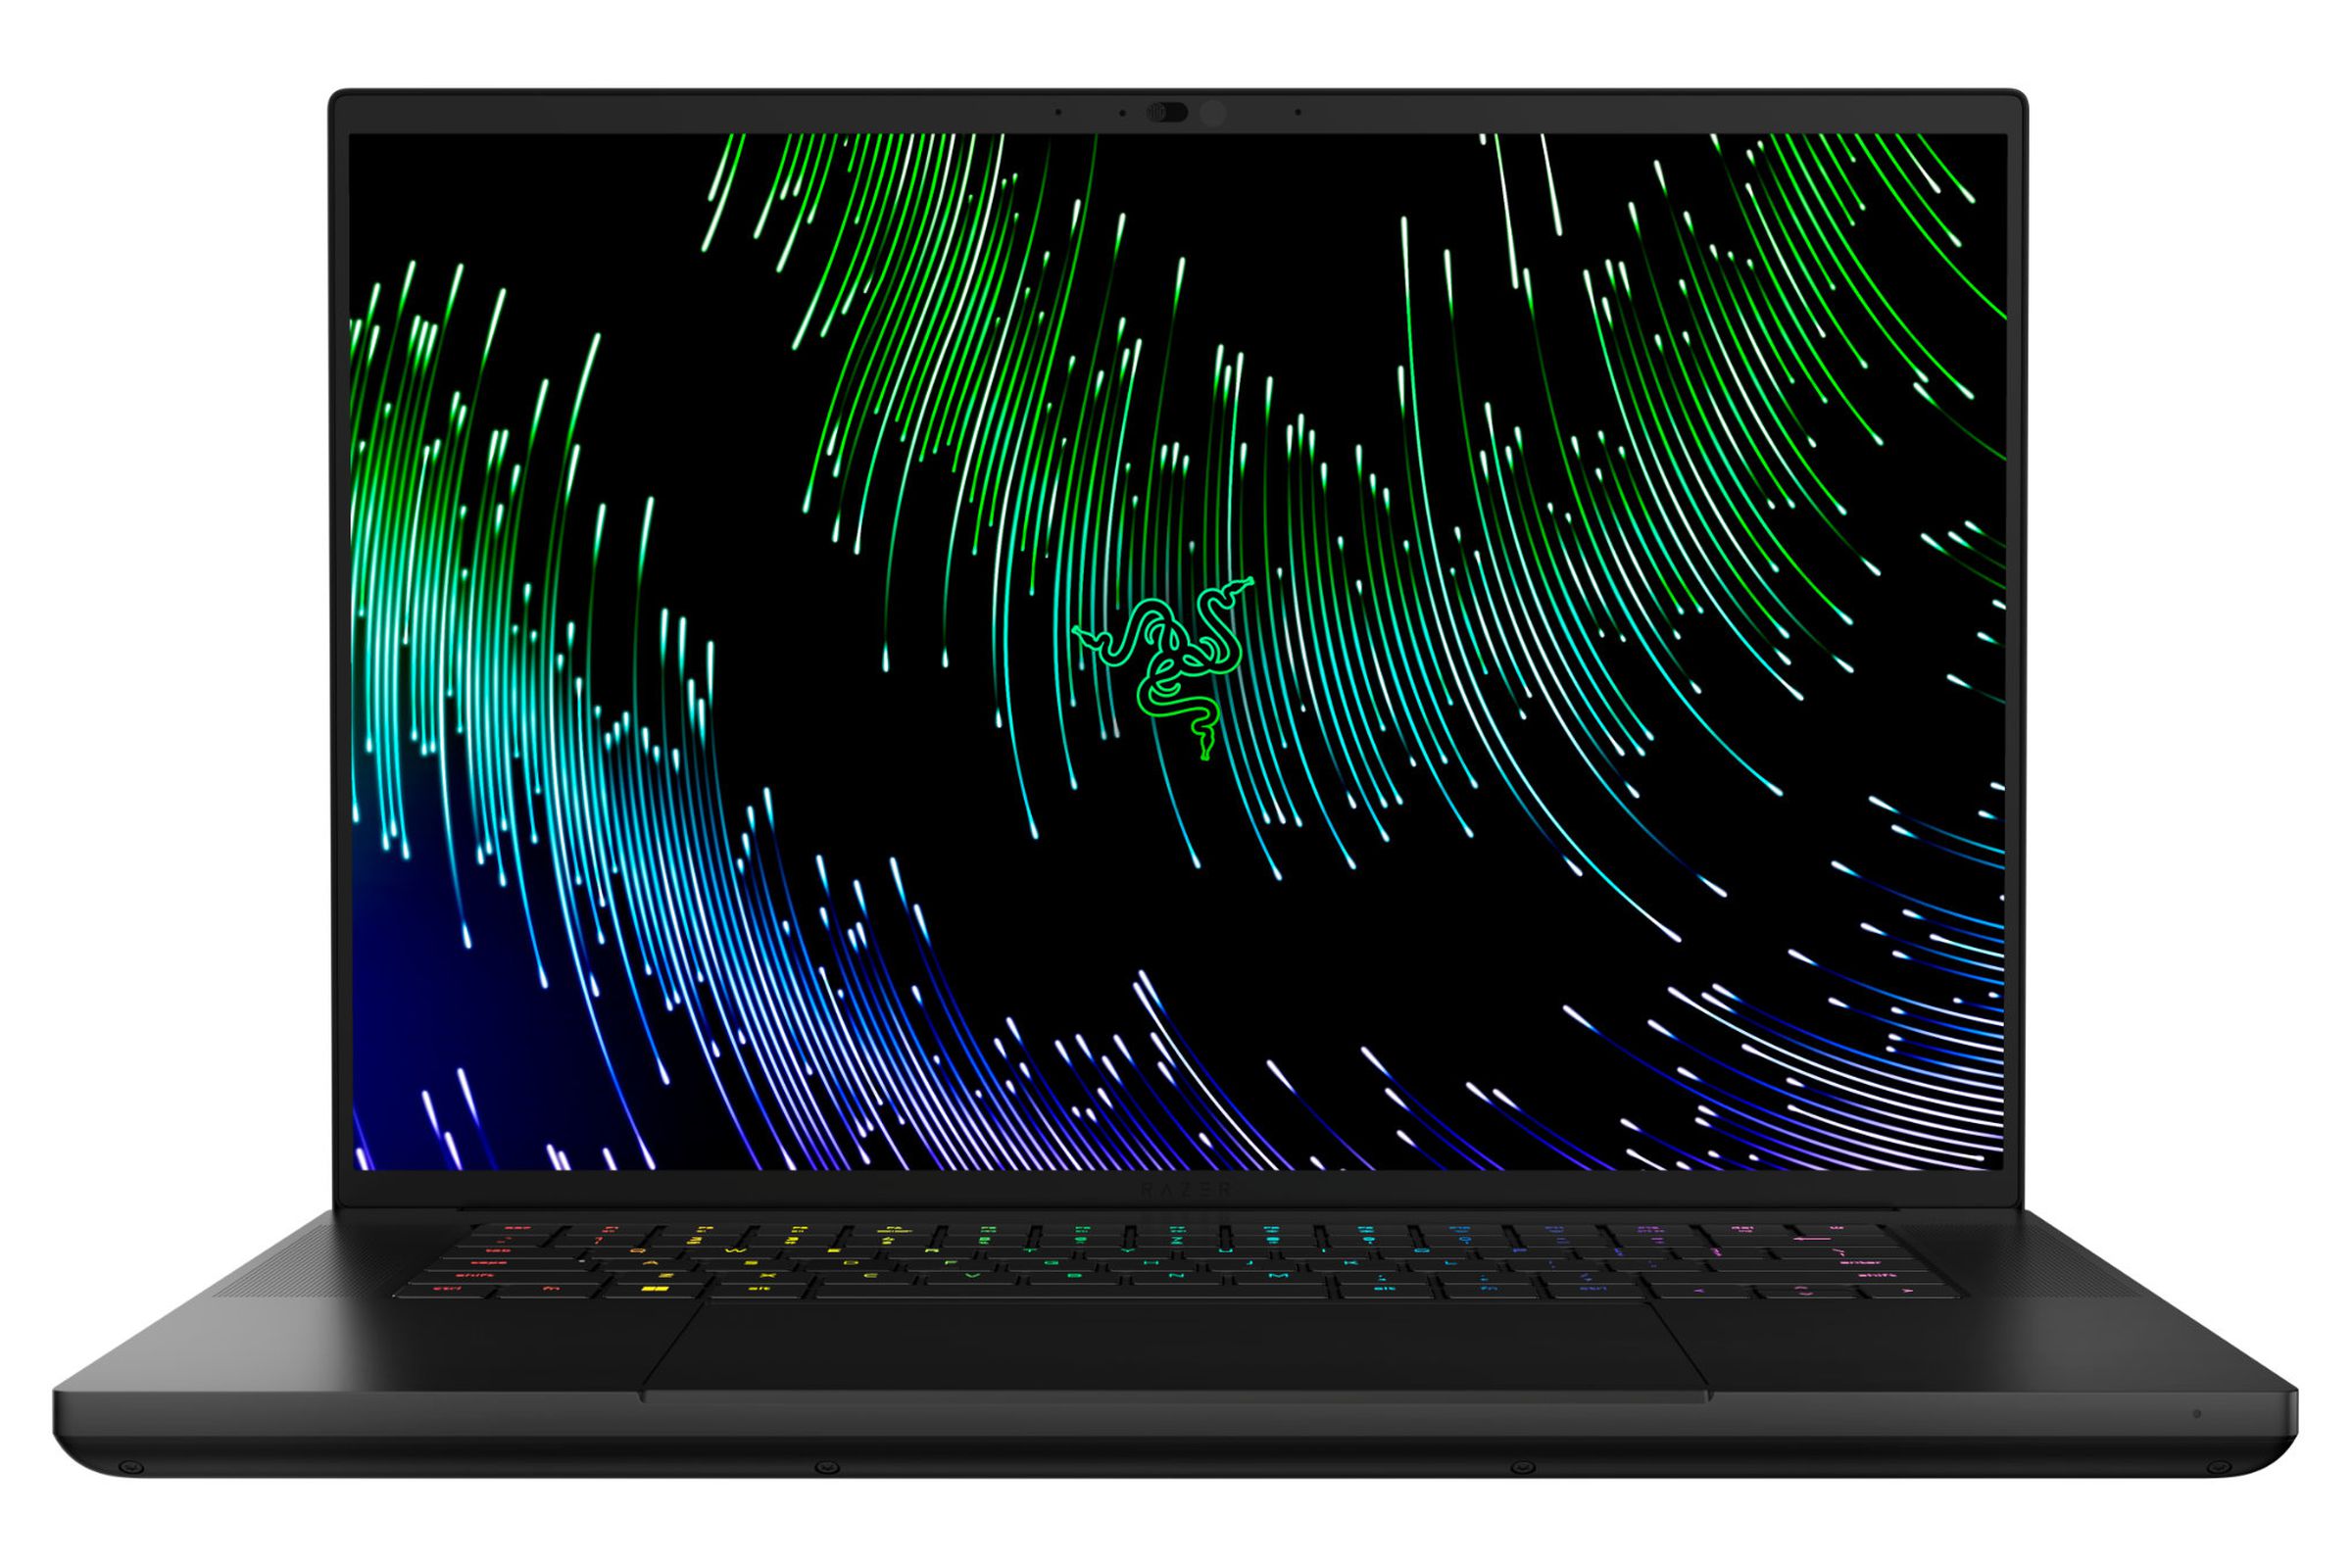 A straight-on shot of the Blade 16 laptop showing off its 16-inch QHD screen.